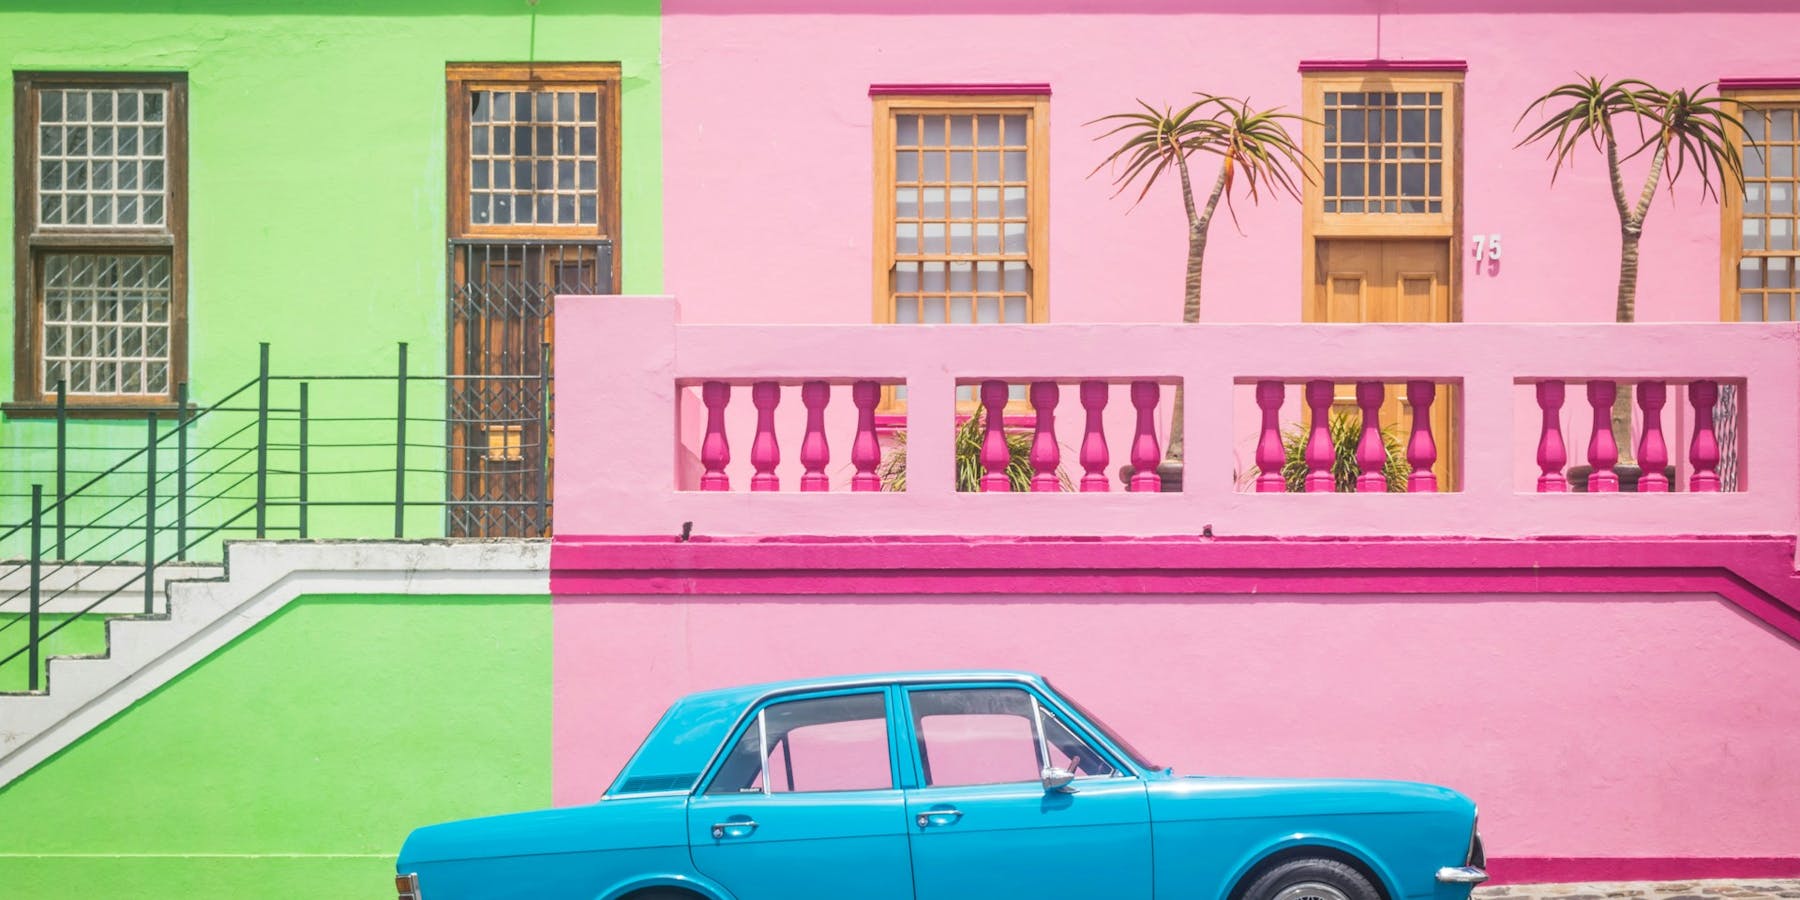 Bo-Kaap, Cape Town, South Africa